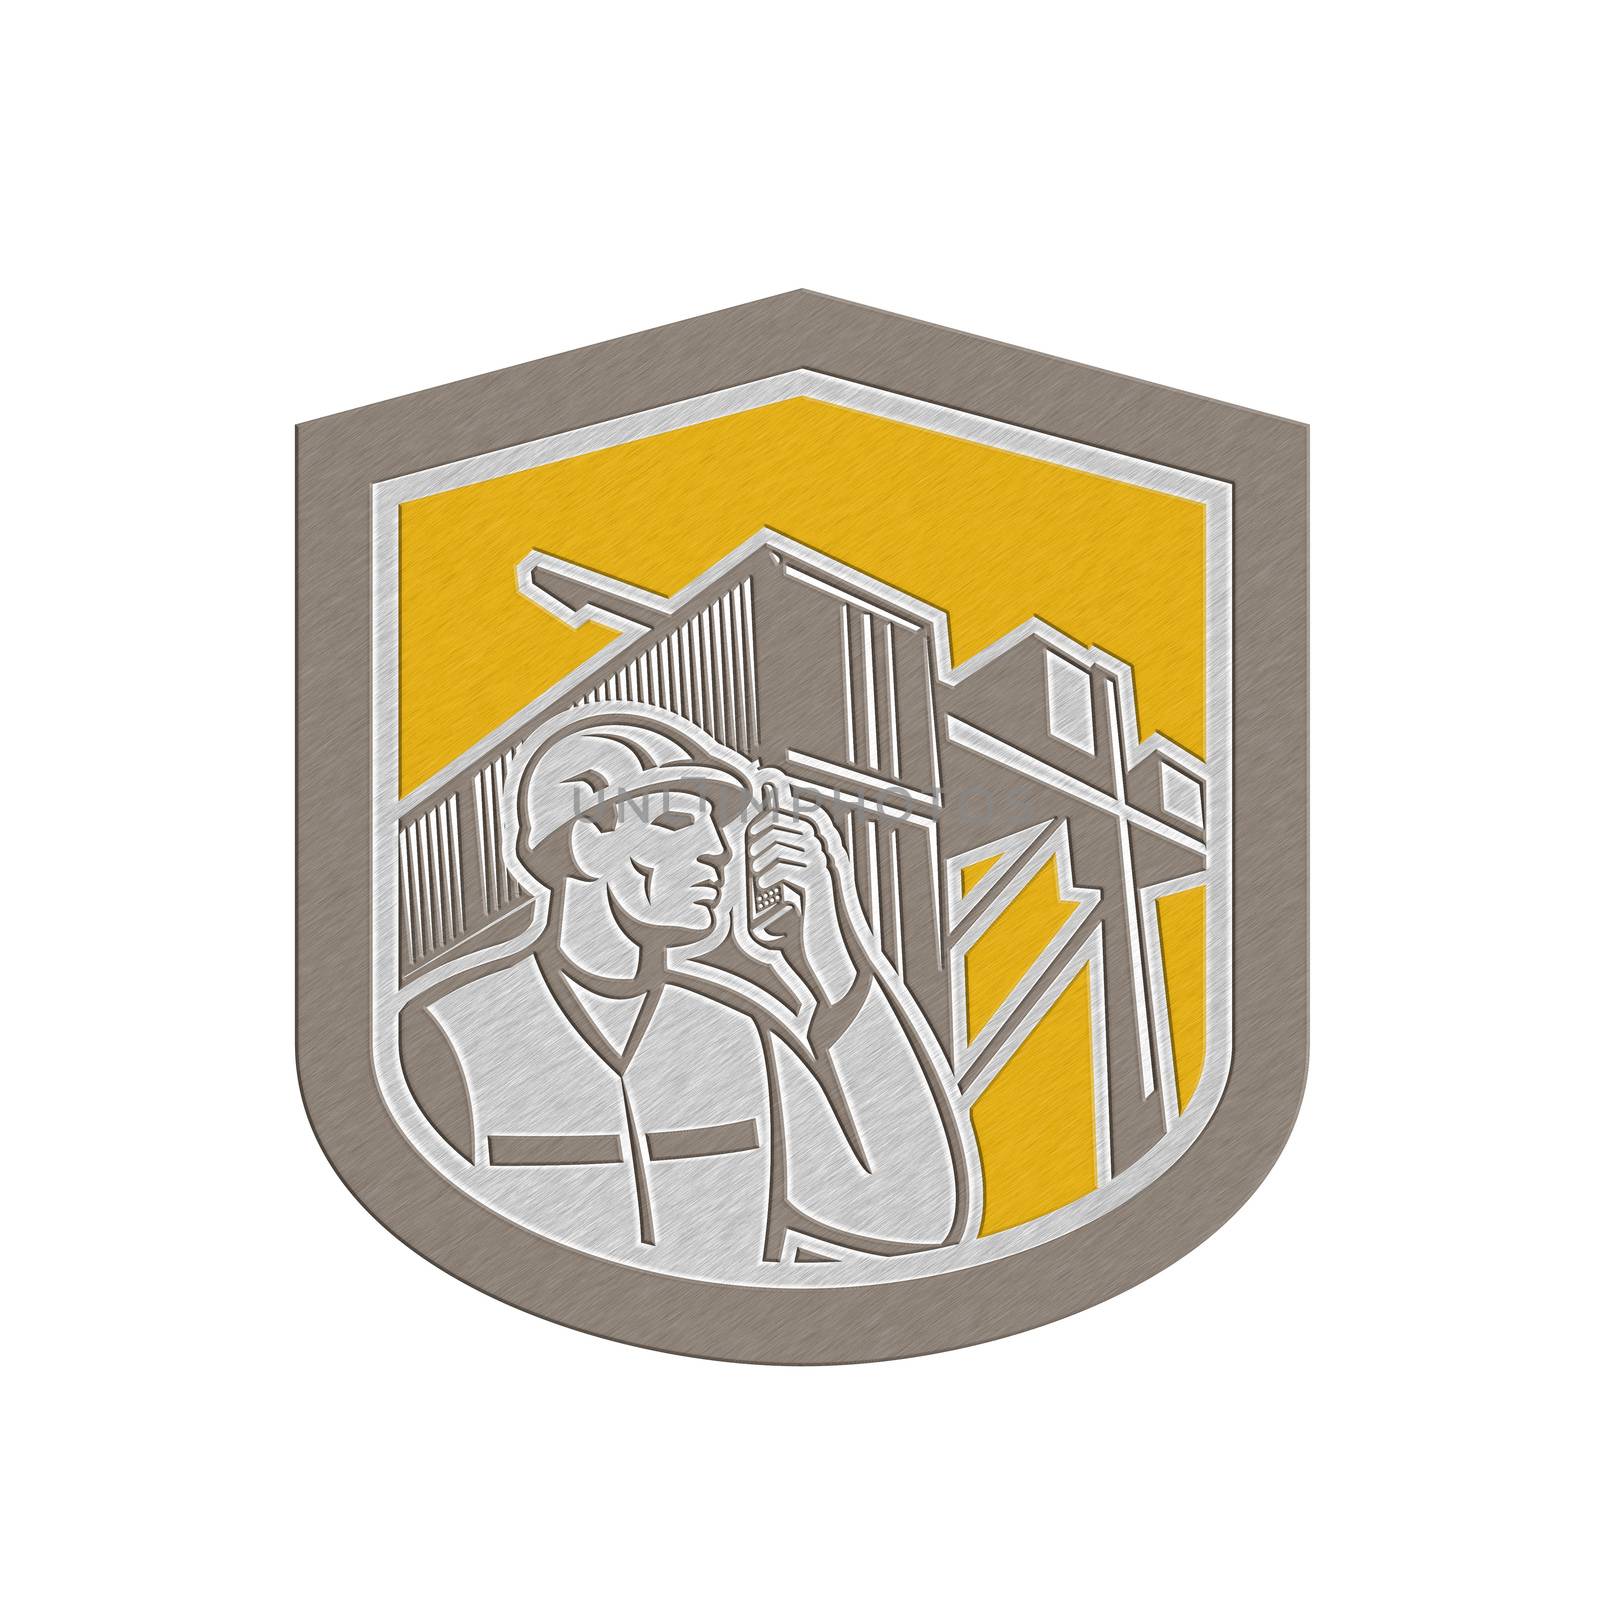 Metallic Dock Worker on Phone Container Yard Shield by patrimonio